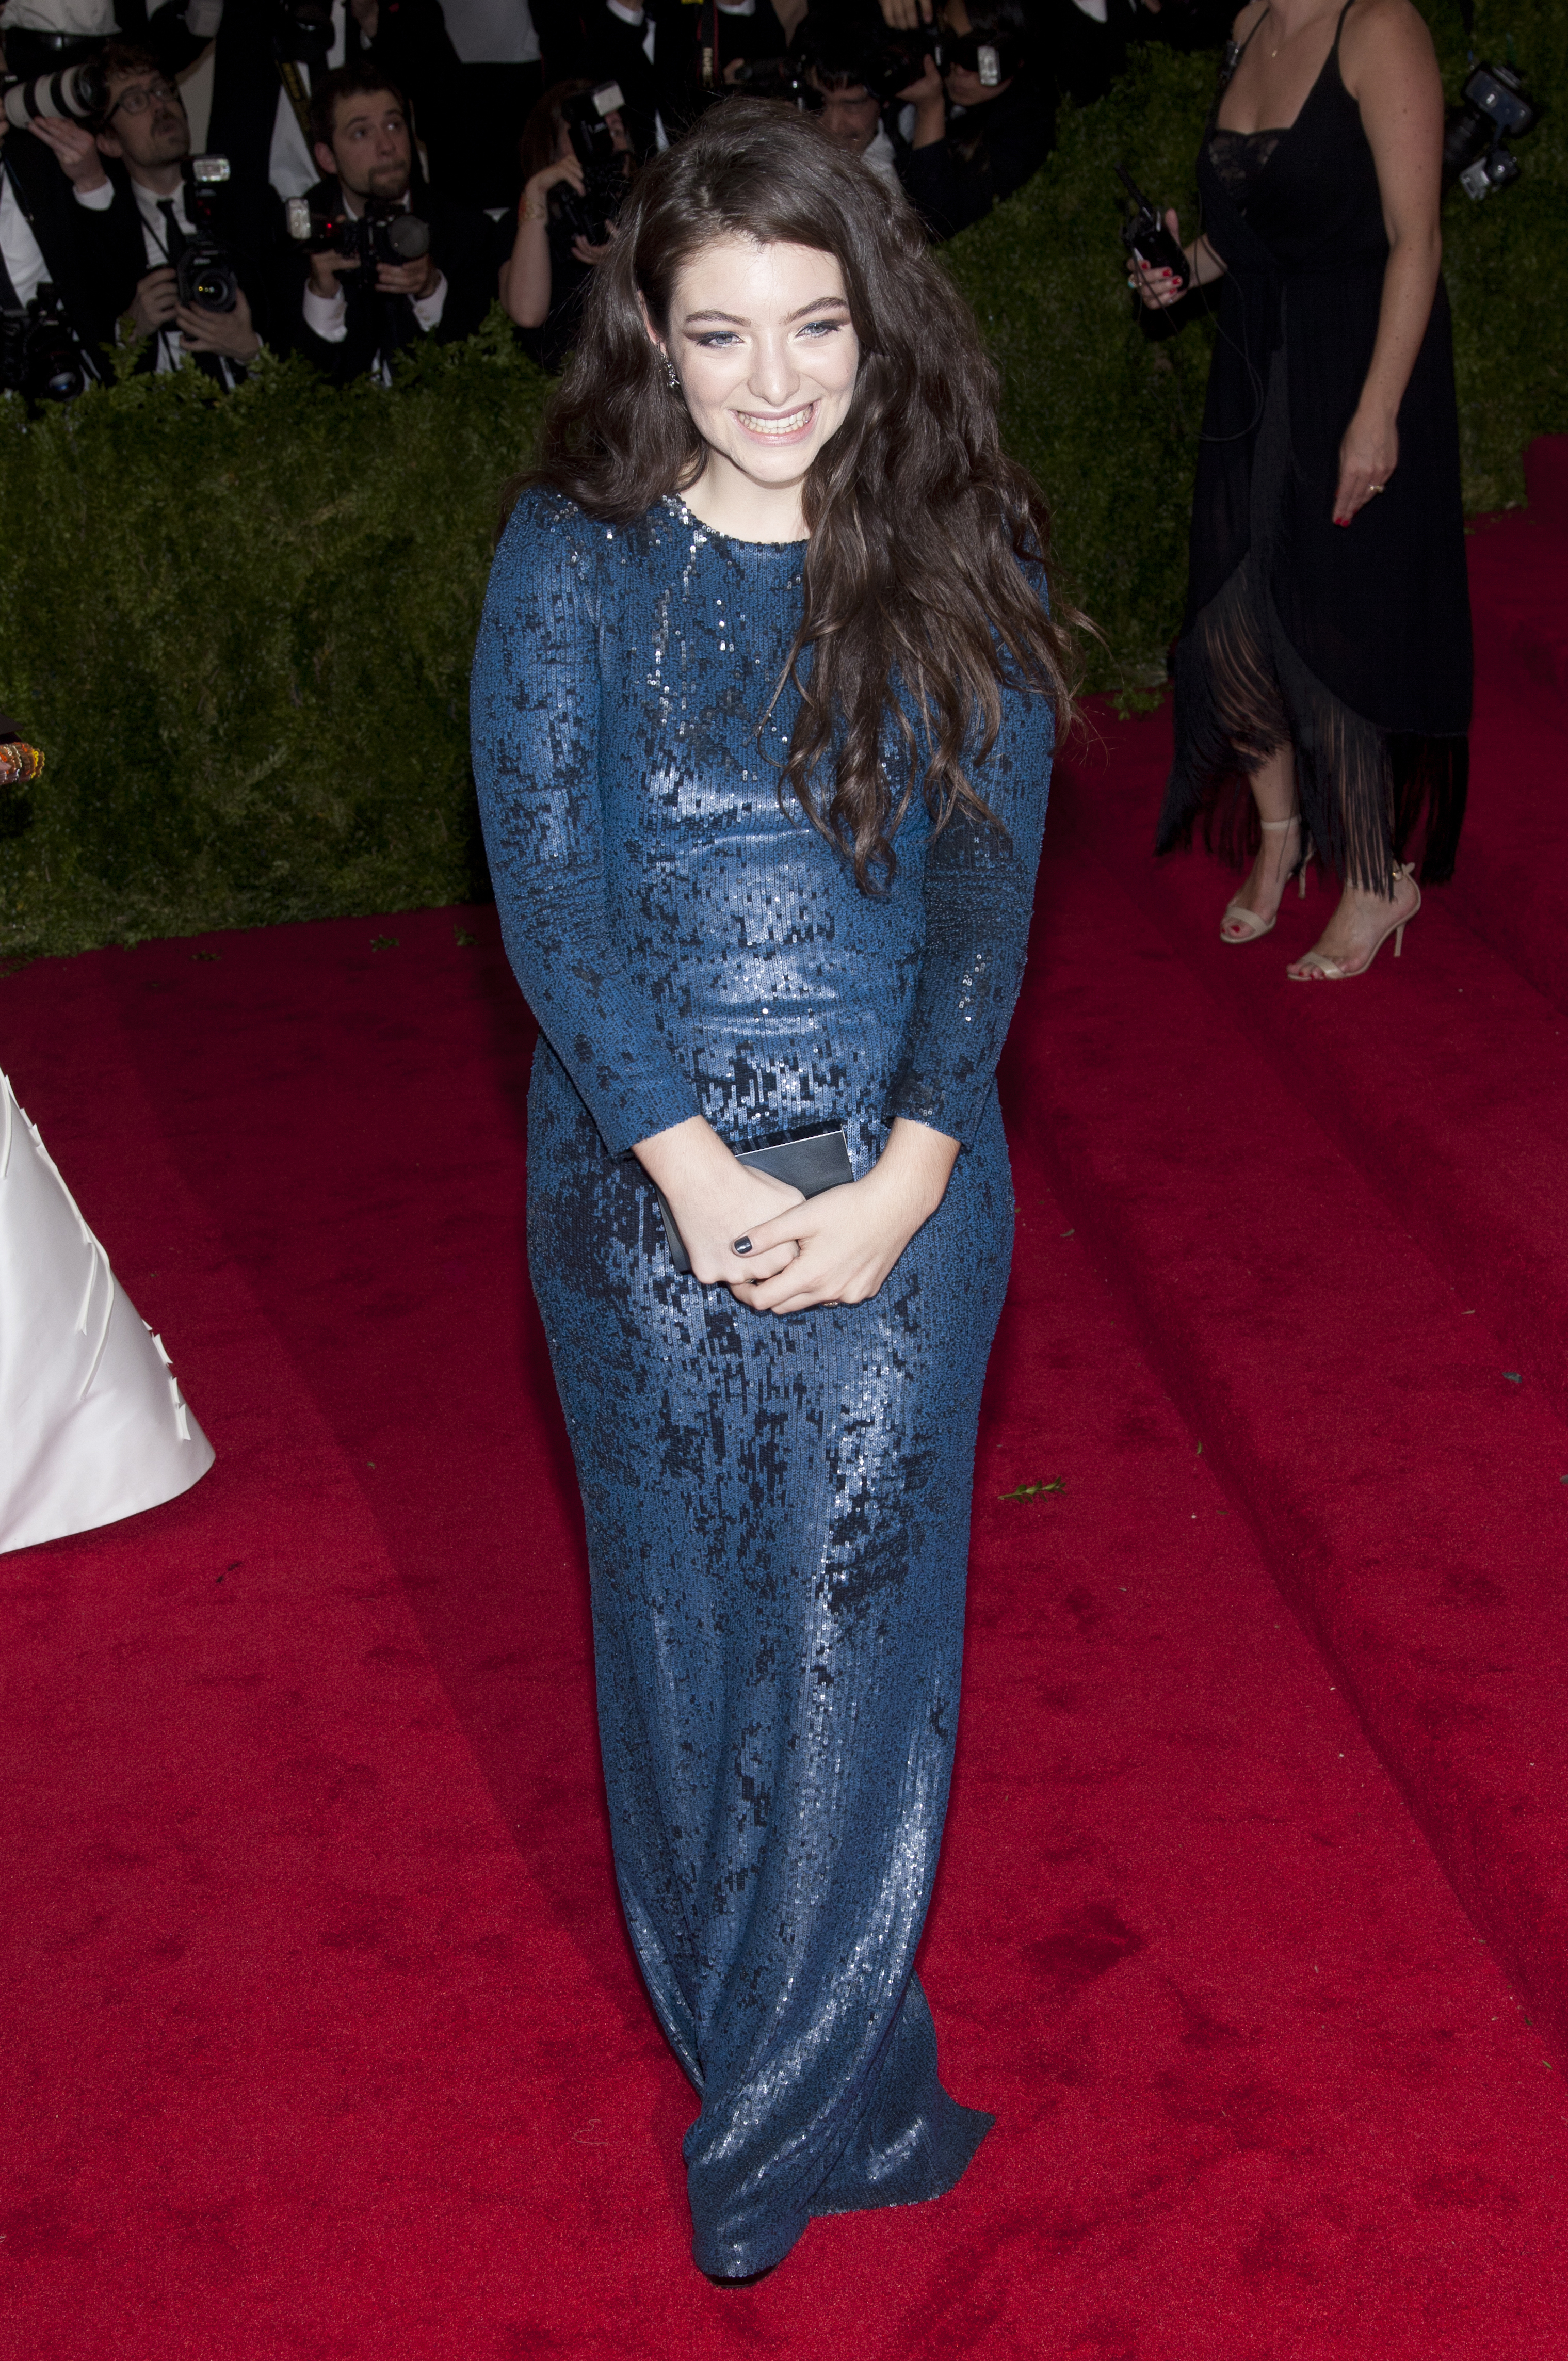 Lorde in a long-sleeved, sequined gown at a red carpet event